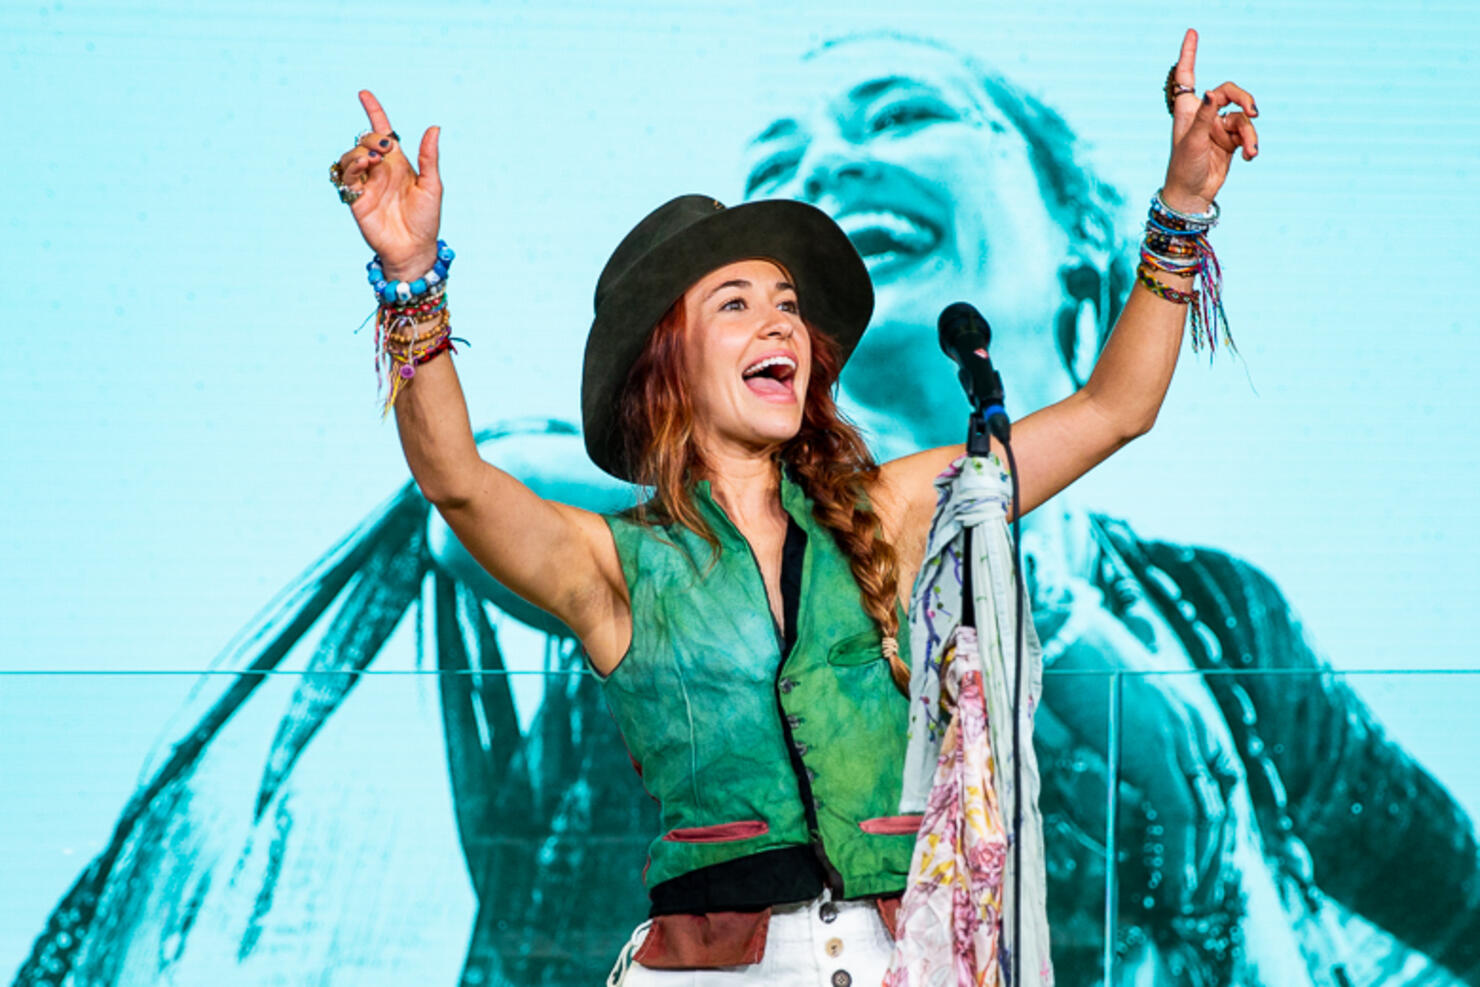 Lauren Daigle Announces 2020 World Tour During Intimate NYC Performance